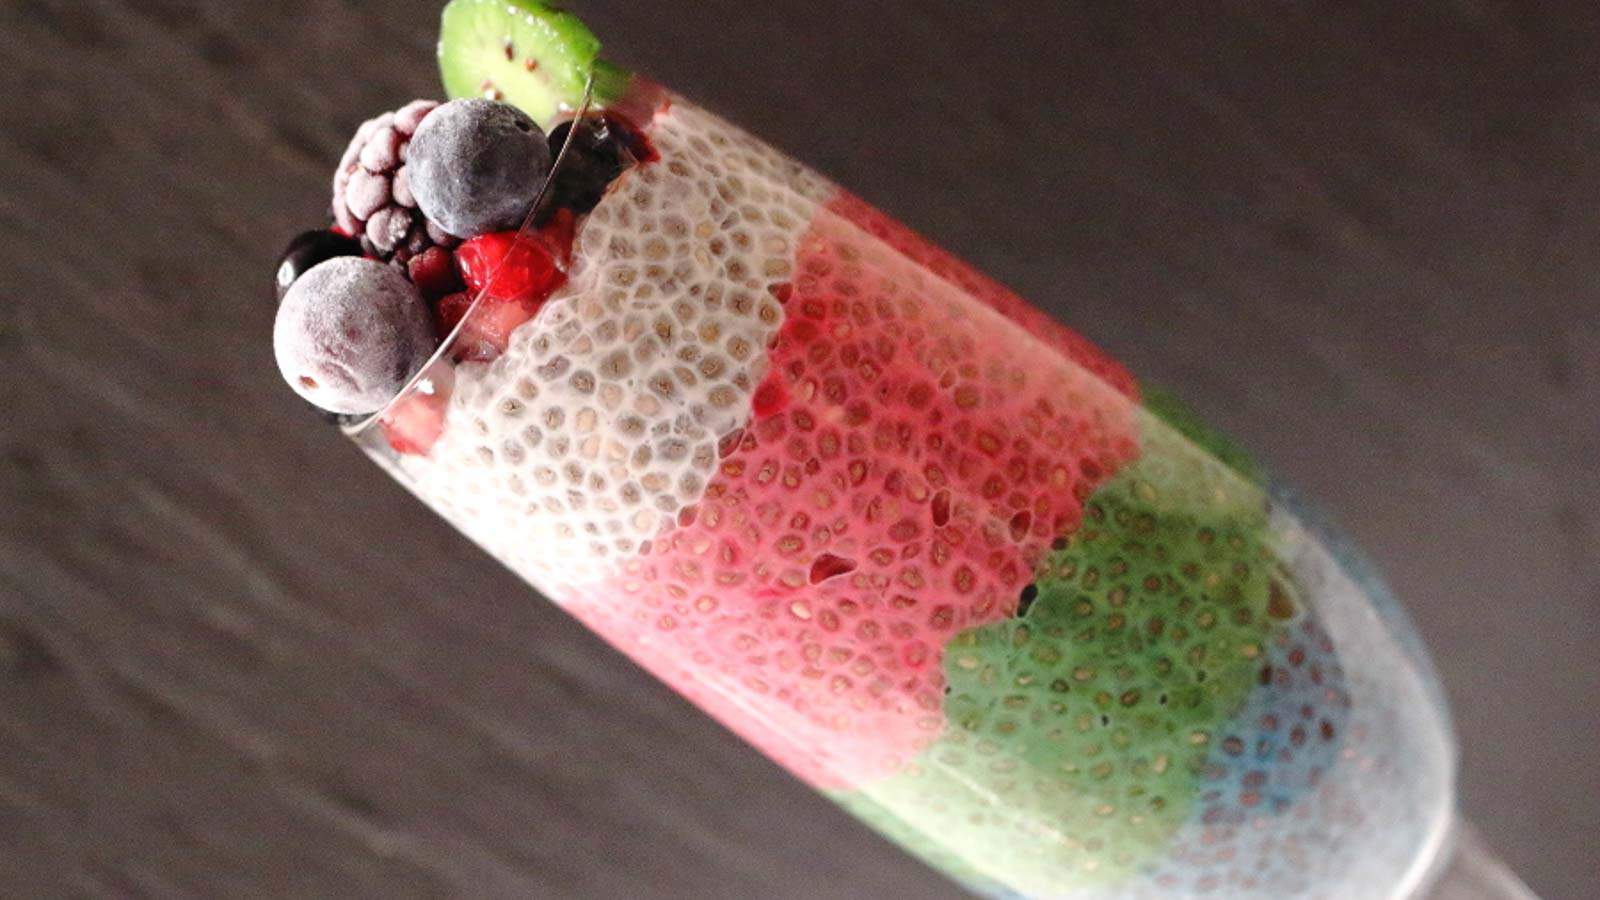 <p>Embrace simplicity with Radiant Rainbow Chia Delight-a lazy person’s dream breakfast. Combine vibrant layers of chia goodness for a visually appealing and nutritious start to your day. No cooking required, just assemble and enjoy.<br><strong>Get the Recipe: </strong><a href="https://www.lowcarb-nocarb.com/rainbow-low-carb-chia-pudding/?utm_source=msn&utm_medium=page&utm_campaign=18 extremely quick and easy breakfast ideas for lazy people">Radiant Rainbow Chia Delight</a></p>